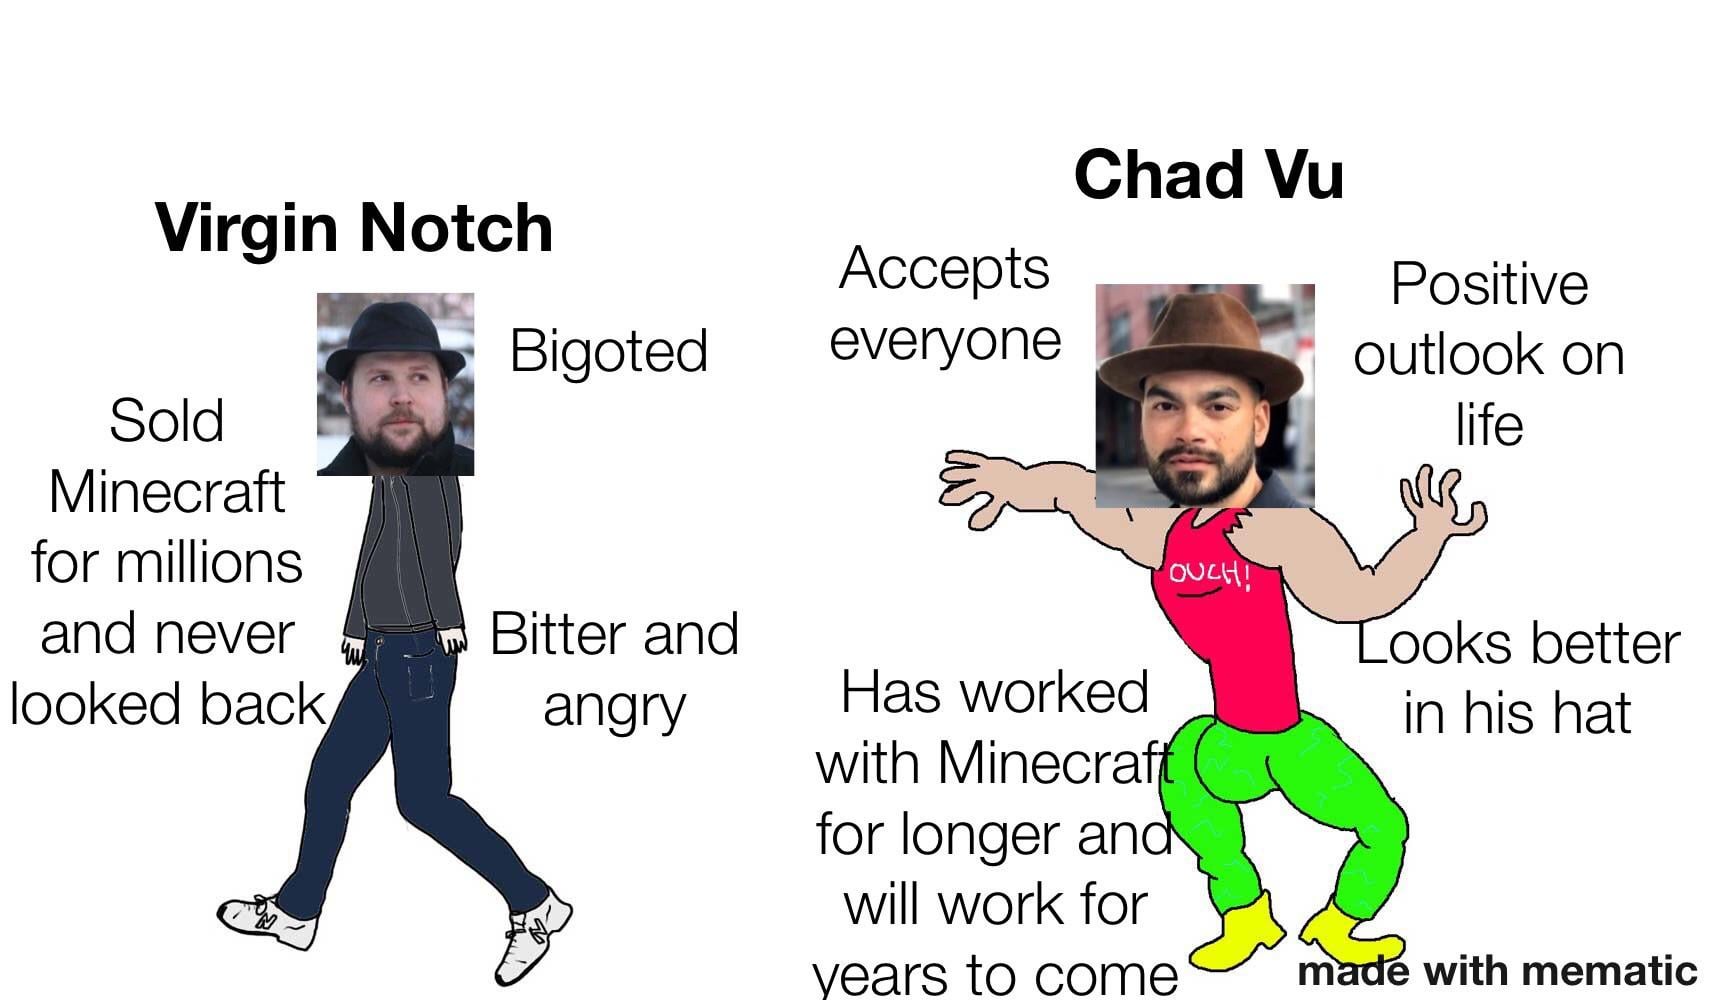 Minecraft Memes - Saw some people calling Vu the knockoff Notch, just wanted to set things straight.